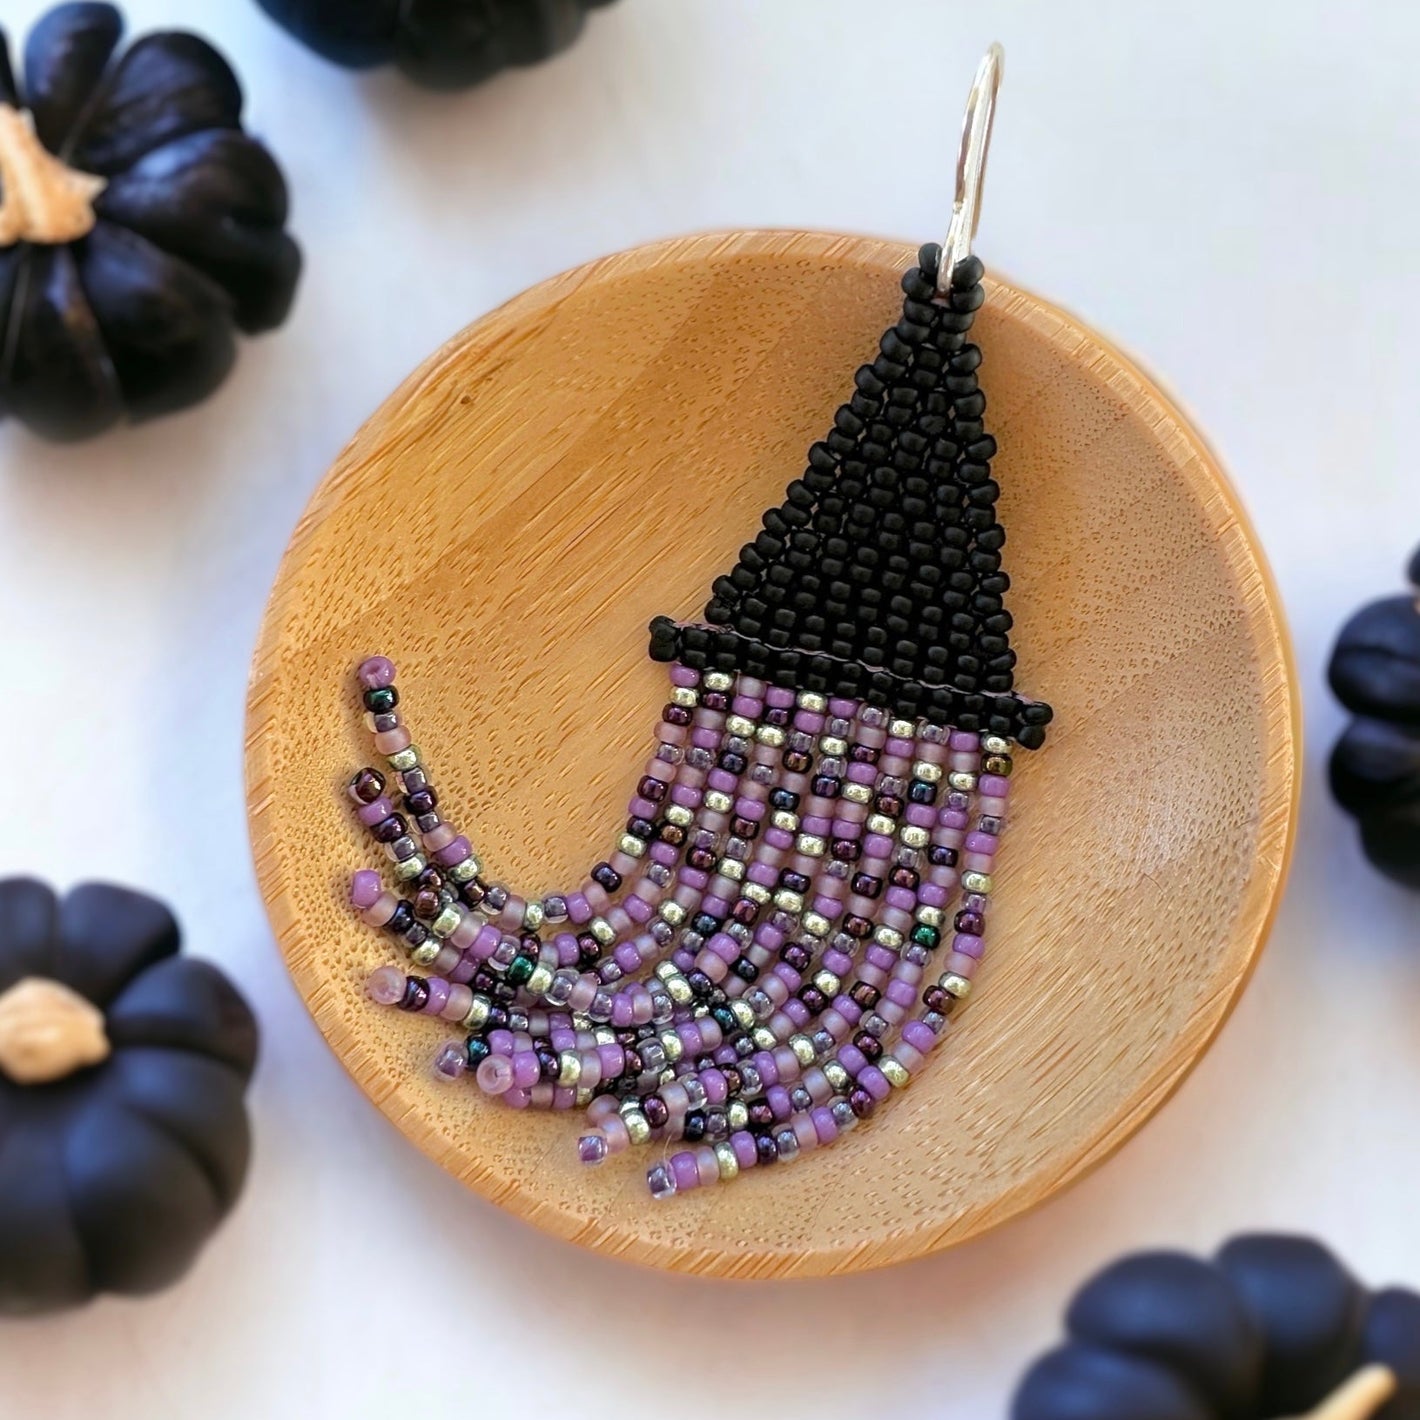 Brick stitch beaded fringe earrings in the shape of a witch's hat with black, purple, and green Miyuki 11/0 seed beads in a wooden dish on a white background surrounded by black pumpkins